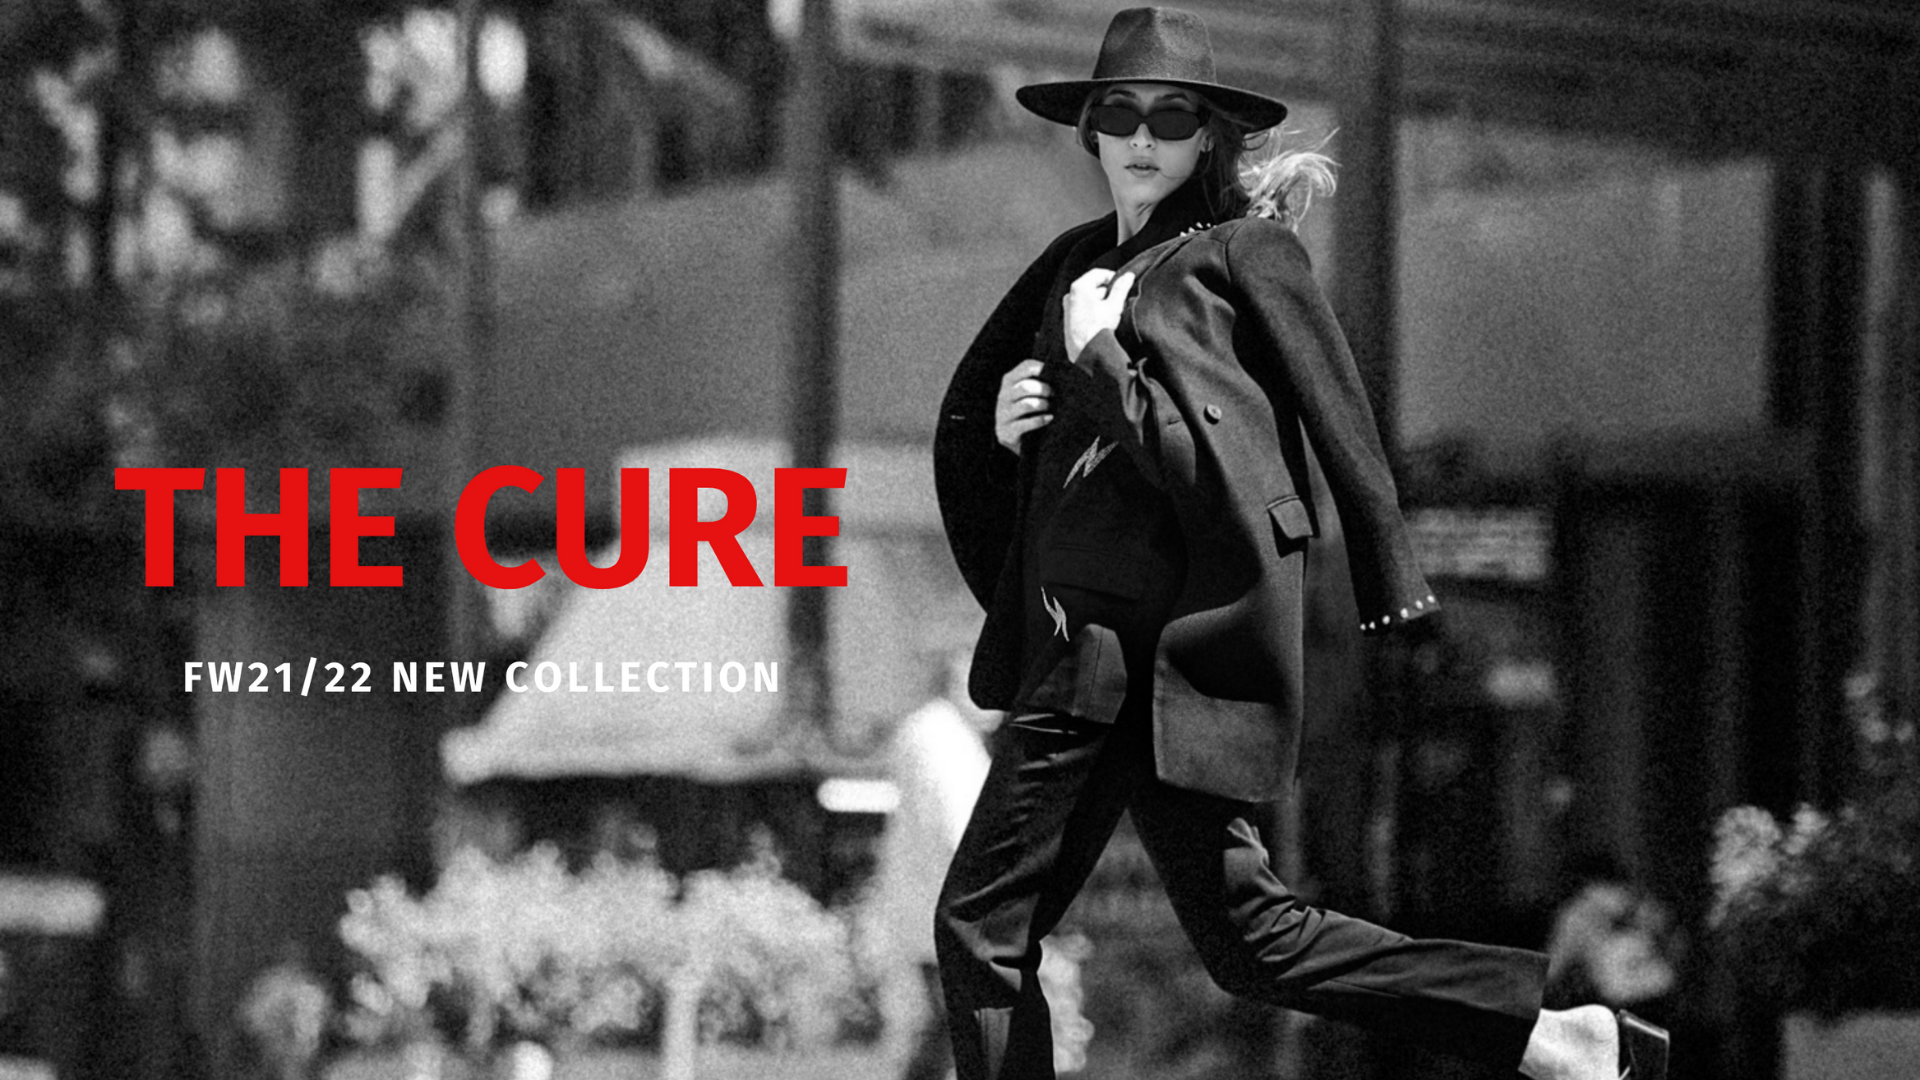 THE CURE | NEW COLLECTION FW21/22 | Cloud 9 by L